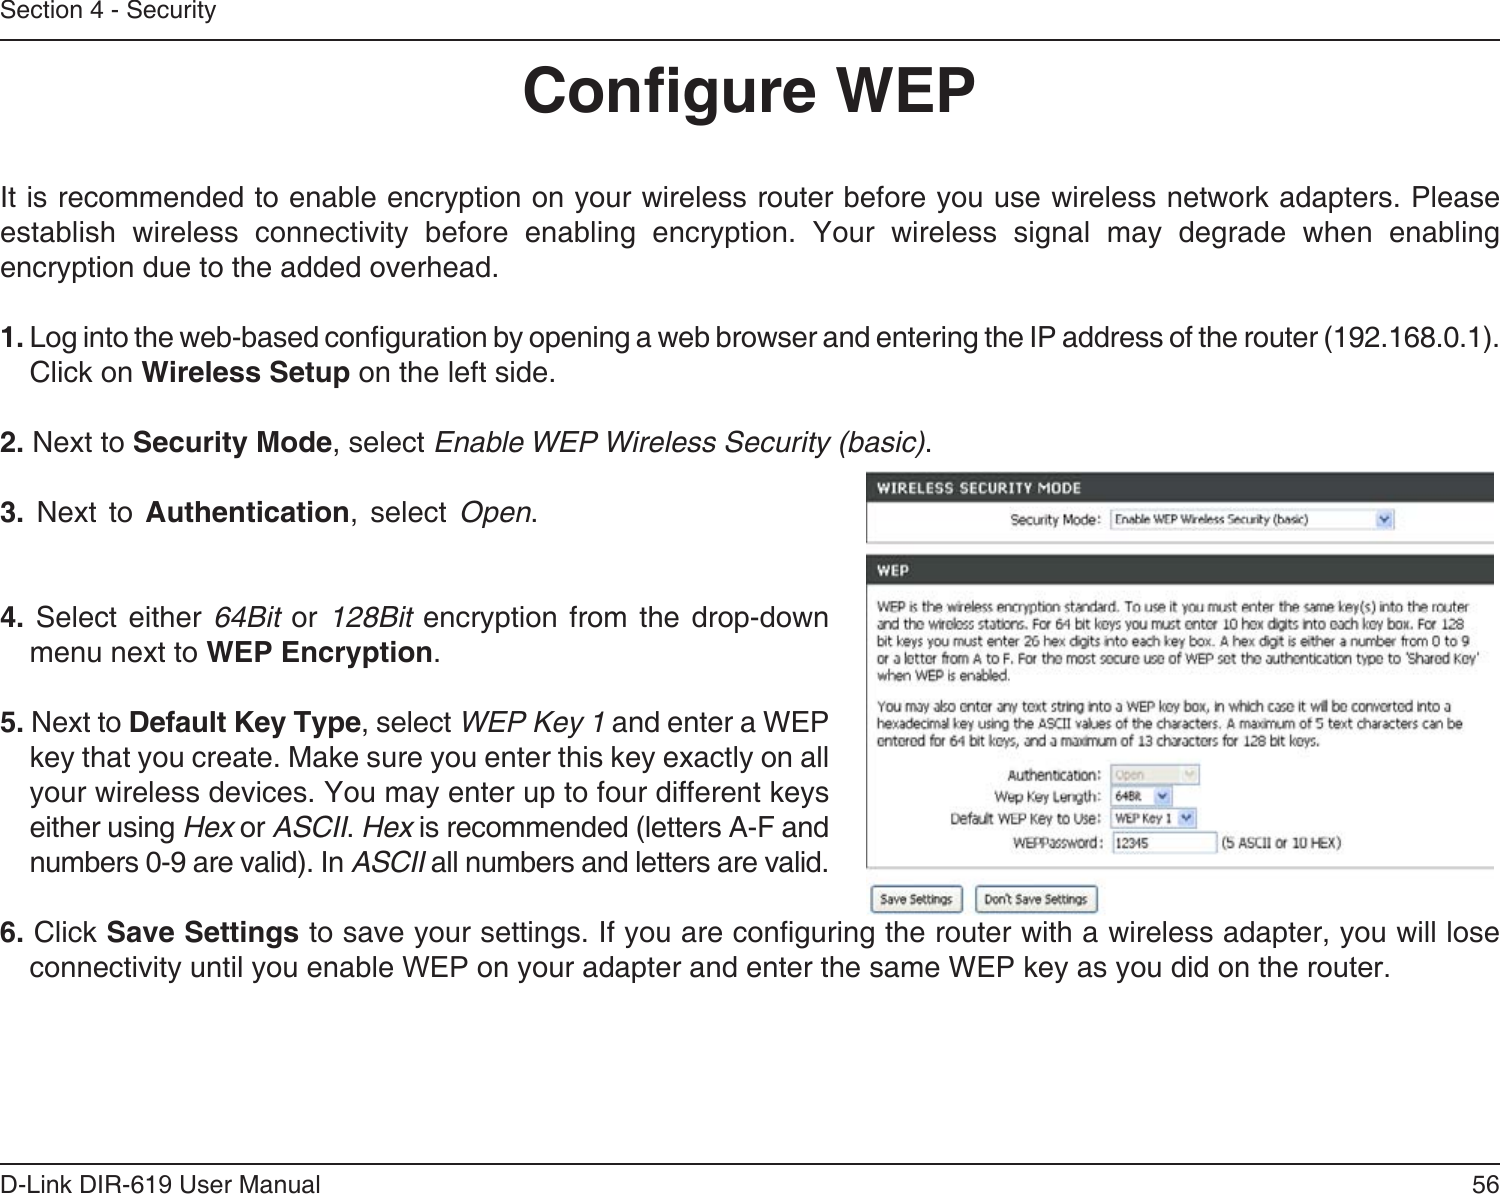 56D-Link DIR-619 User ManualSection 4 - SecurityCongure WEPIt is recommended to enable encryption on your wireless router before you use wireless network adapters. Pleaseestablish wireless connectivity before enabling encryption. Your wireless signal may degrade when enablingencryption due to the added overhead.1. Log into the web-based conguration by opening a web browser and entering the IP address of the router (192.168.0.1).   Click on Wireless Setup on the left side.2. Next to Security Mode, select Enable WEP Wireless Security (basic).3. Next to Authentication, select Open. 4.  Select either  64Bit  or  128Bit  encryption from  the  drop-downmenu next to WEP Encryption. 5. Next to Default Key Type, select WEP Key 1 and enter a WEPkey that you create. Make sure you enter this key exactly on allyour wireless devices. You may enter up to four different keyseither using Hex or ASCII. Hex is recommended (letters A-F andnumbers 0-9 are valid). In ASCII all numbers and letters are valid.6. Click Save Settings to save your settings. If you are conguring the router with a wireless adapter, you will lose connectivity until you enable WEP on your adapter and enter the same WEP key as you did on the router.